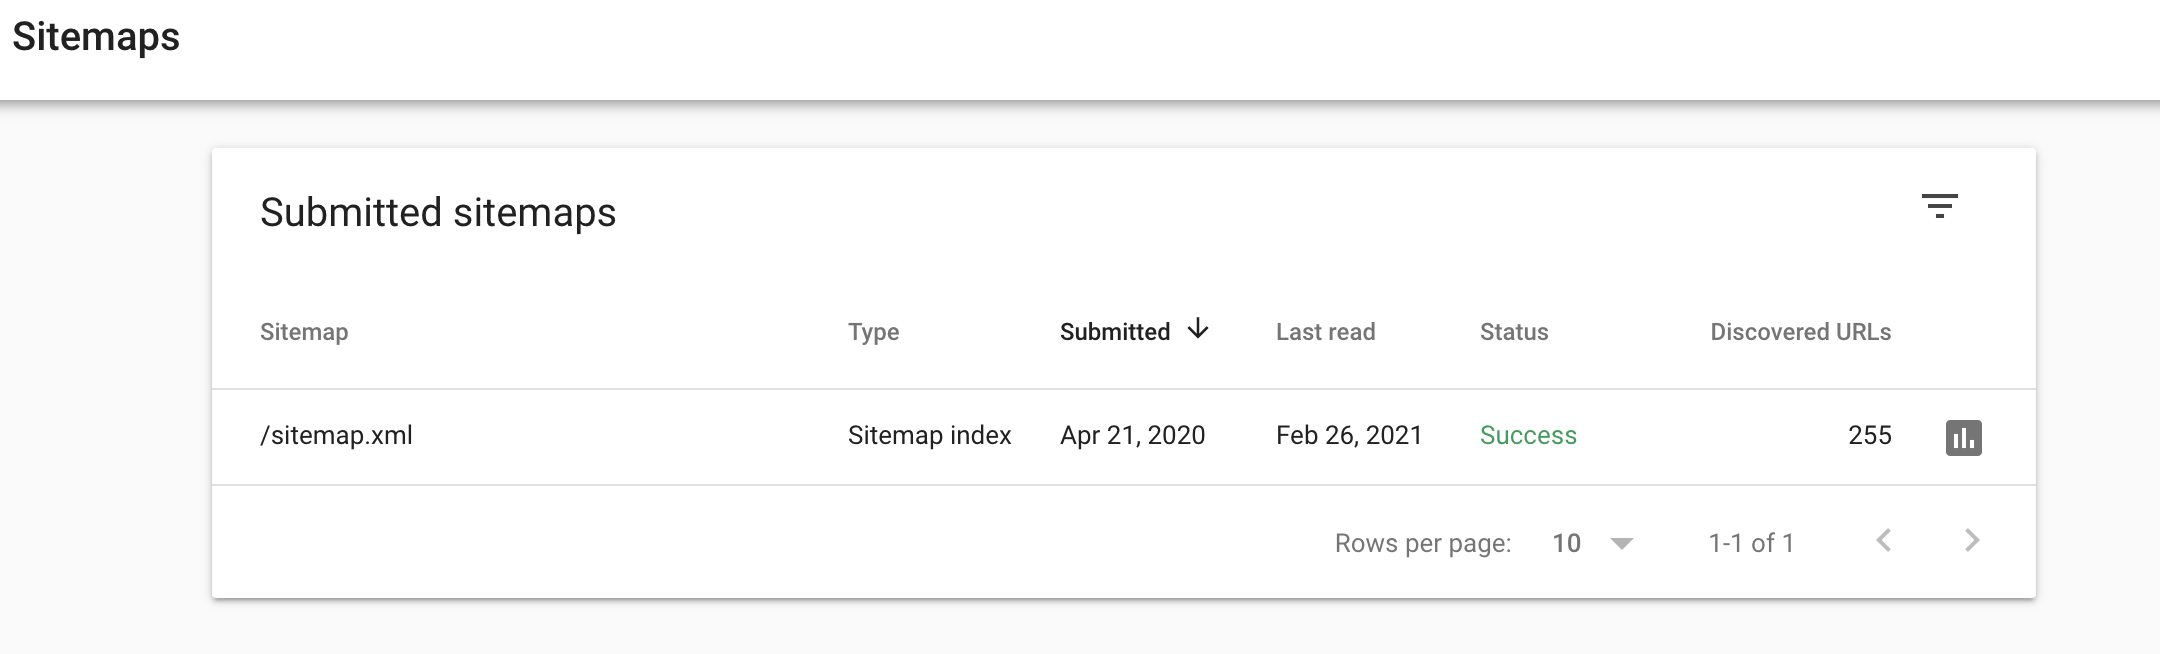 sitemaps google search console